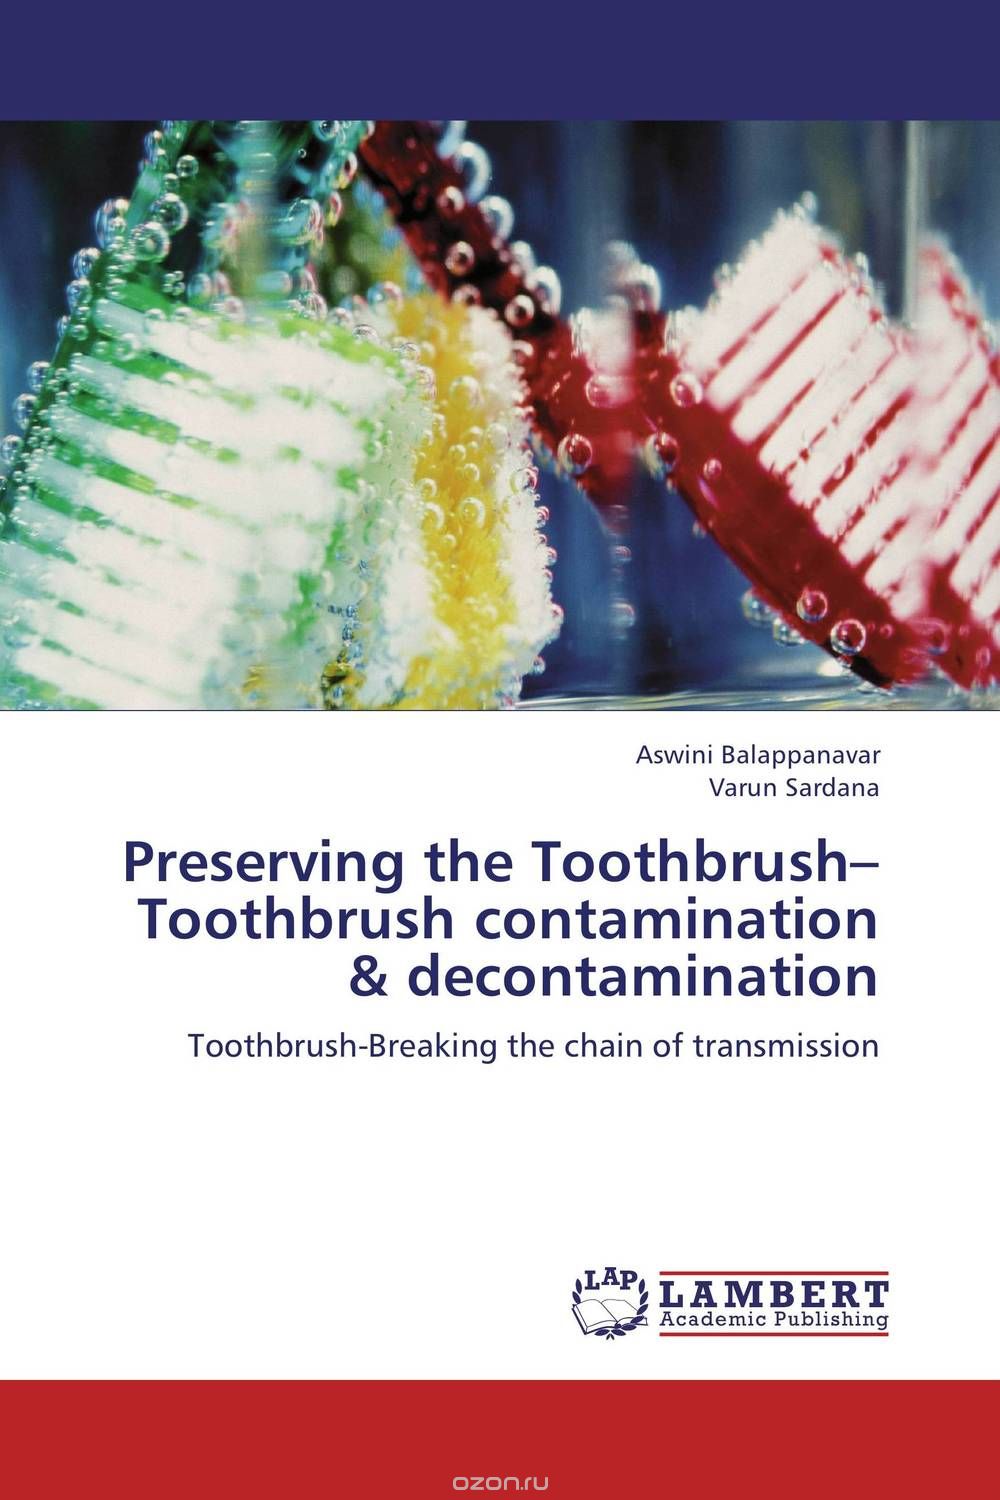 Preserving the Toothbrush–Toothbrush contamination & decontamination